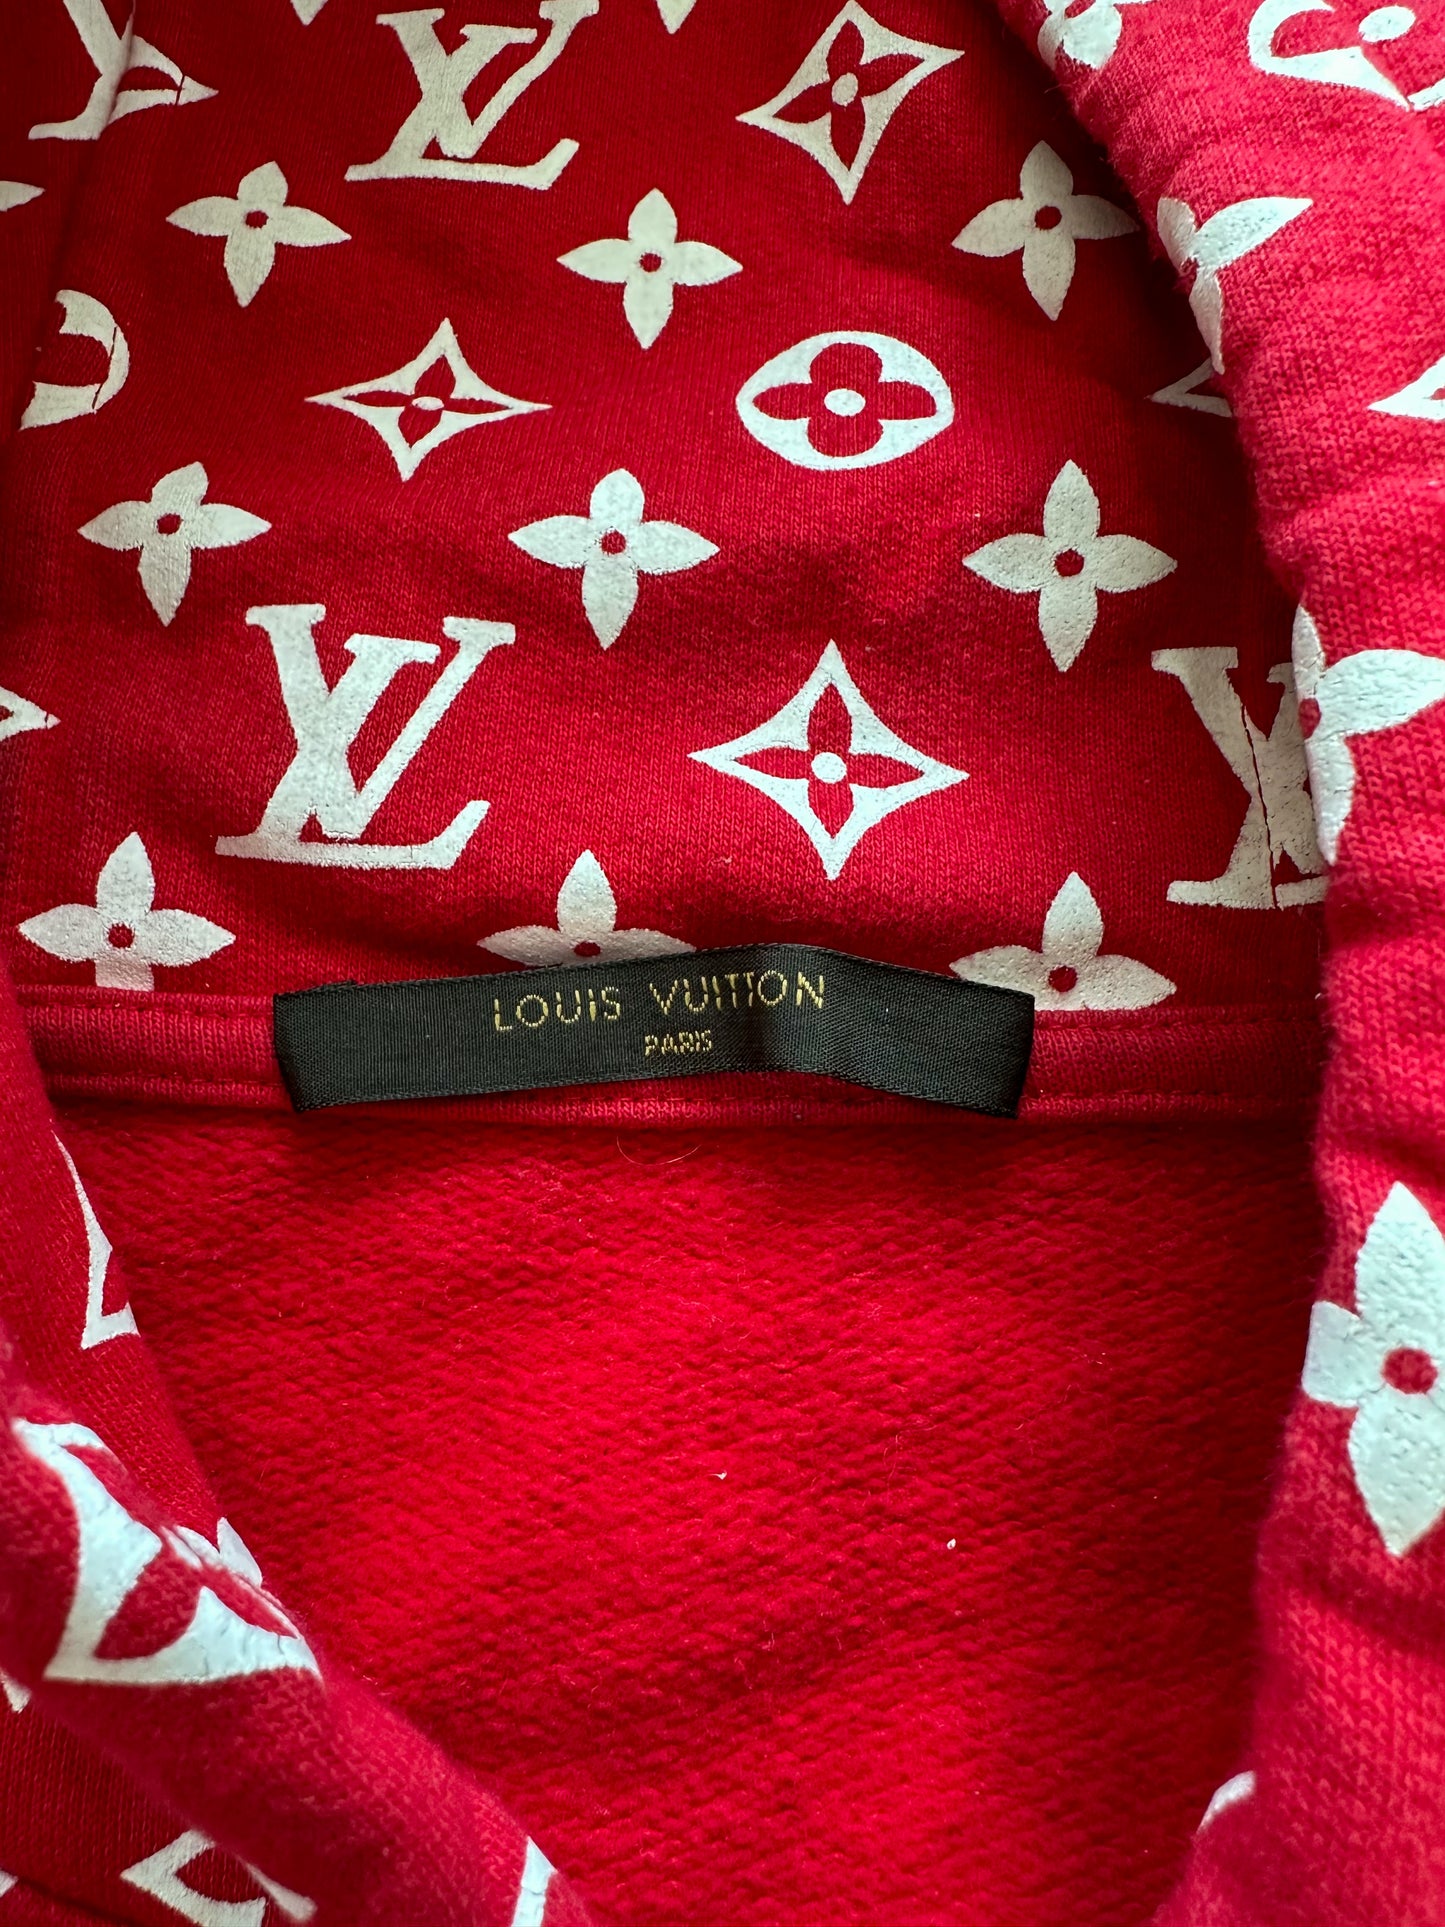 Supreme/Louis Vuitton box logo hoodie in red rumoured to be for European  VIP customers only”